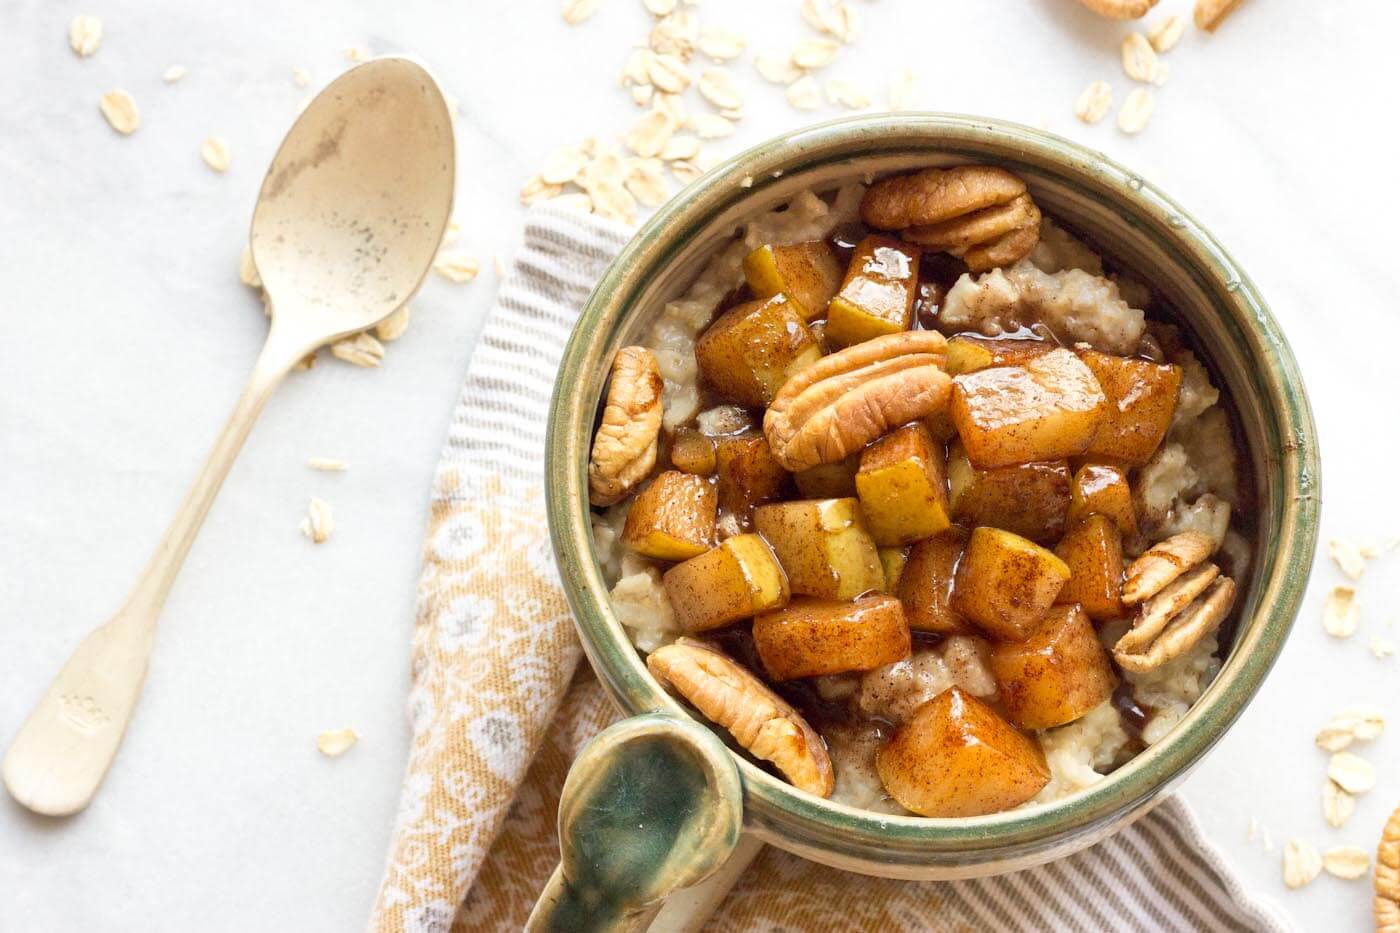 I can't get enough of this Caramelized Pear Oatmeal. It's all cinnamon-y and warm and comforting, especially on a chilly fall morning! YAY!!